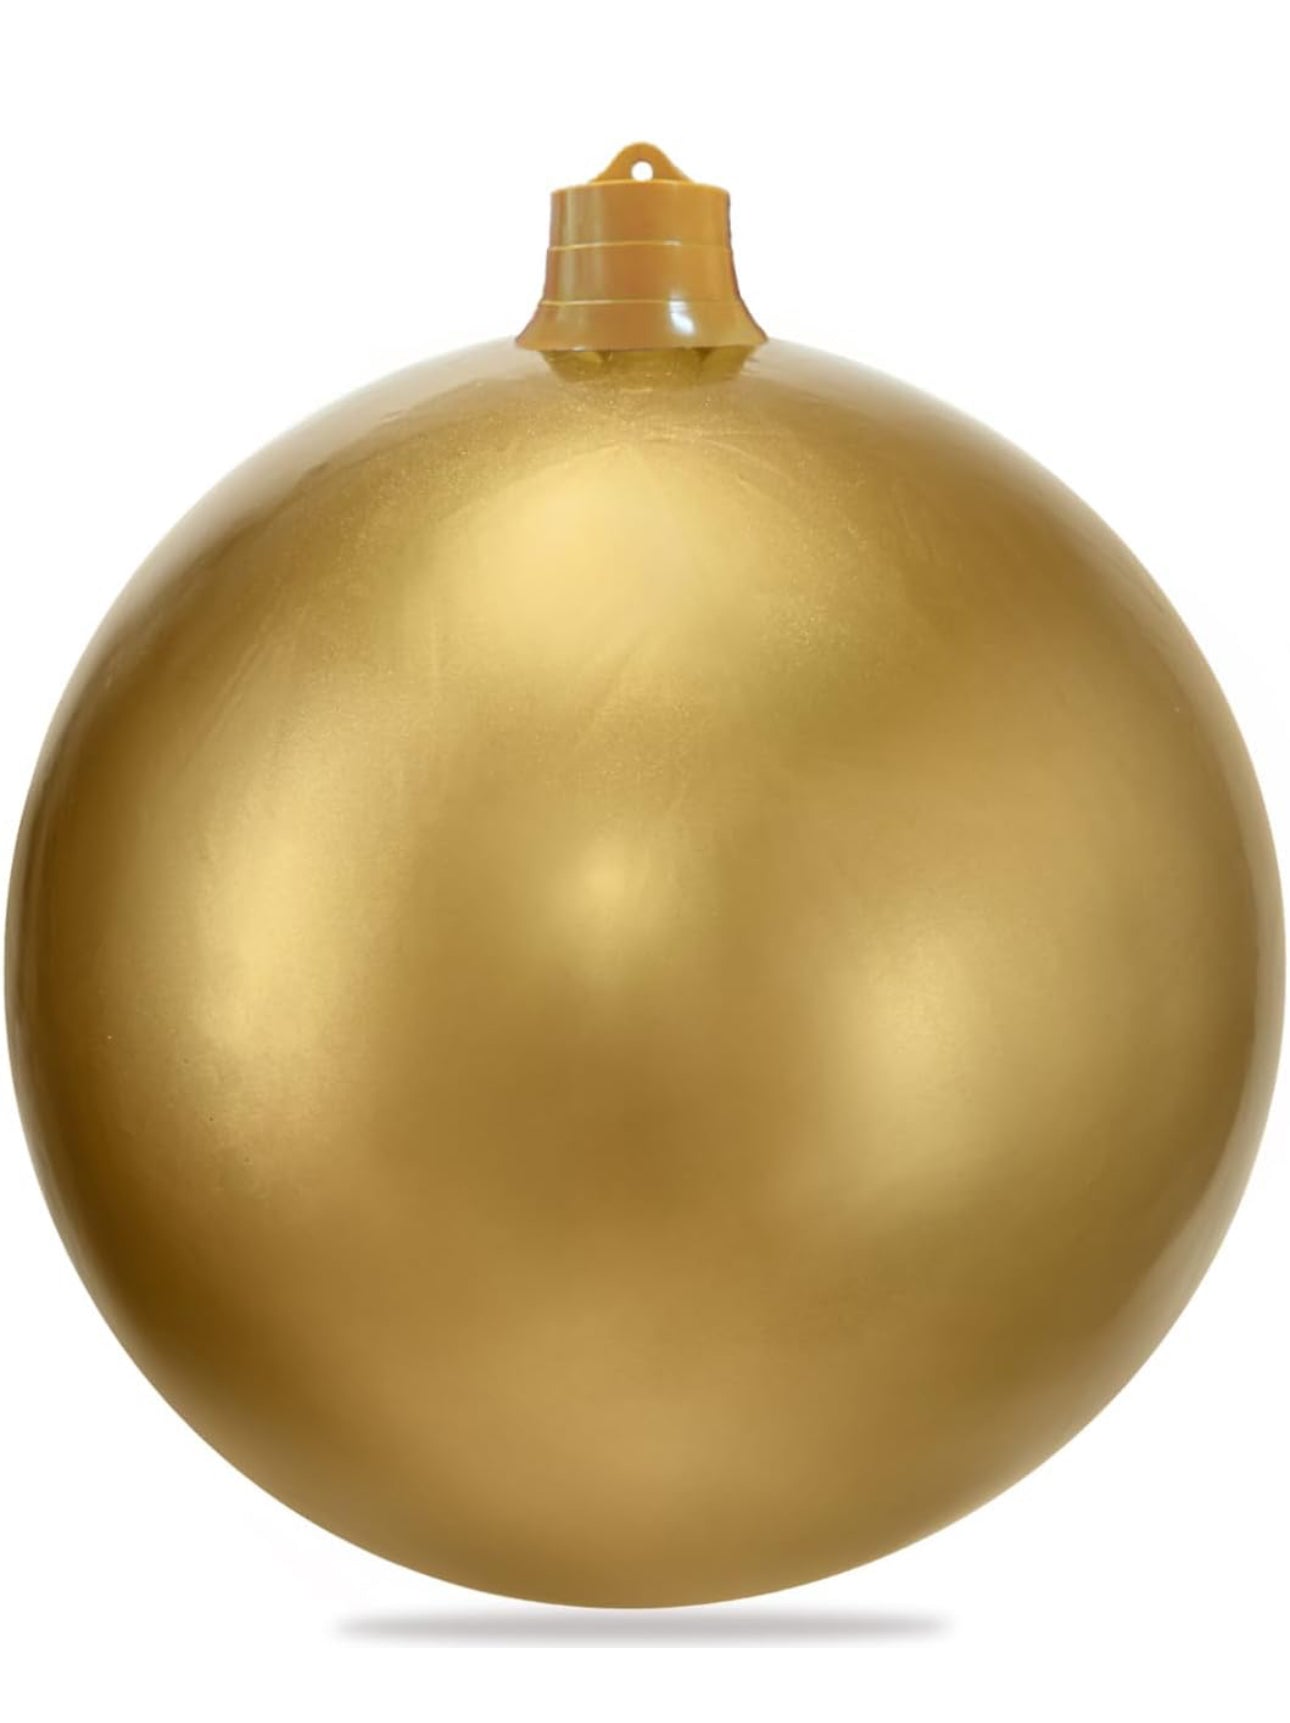 Inflatable Christmas Ornament, 25" Oversized Outdoor Christmas Ball Ornaments, Holiday Yard Christmas Tree Decorations, Indoor and Outdoor Decoration Balls (25 inch, Gold)